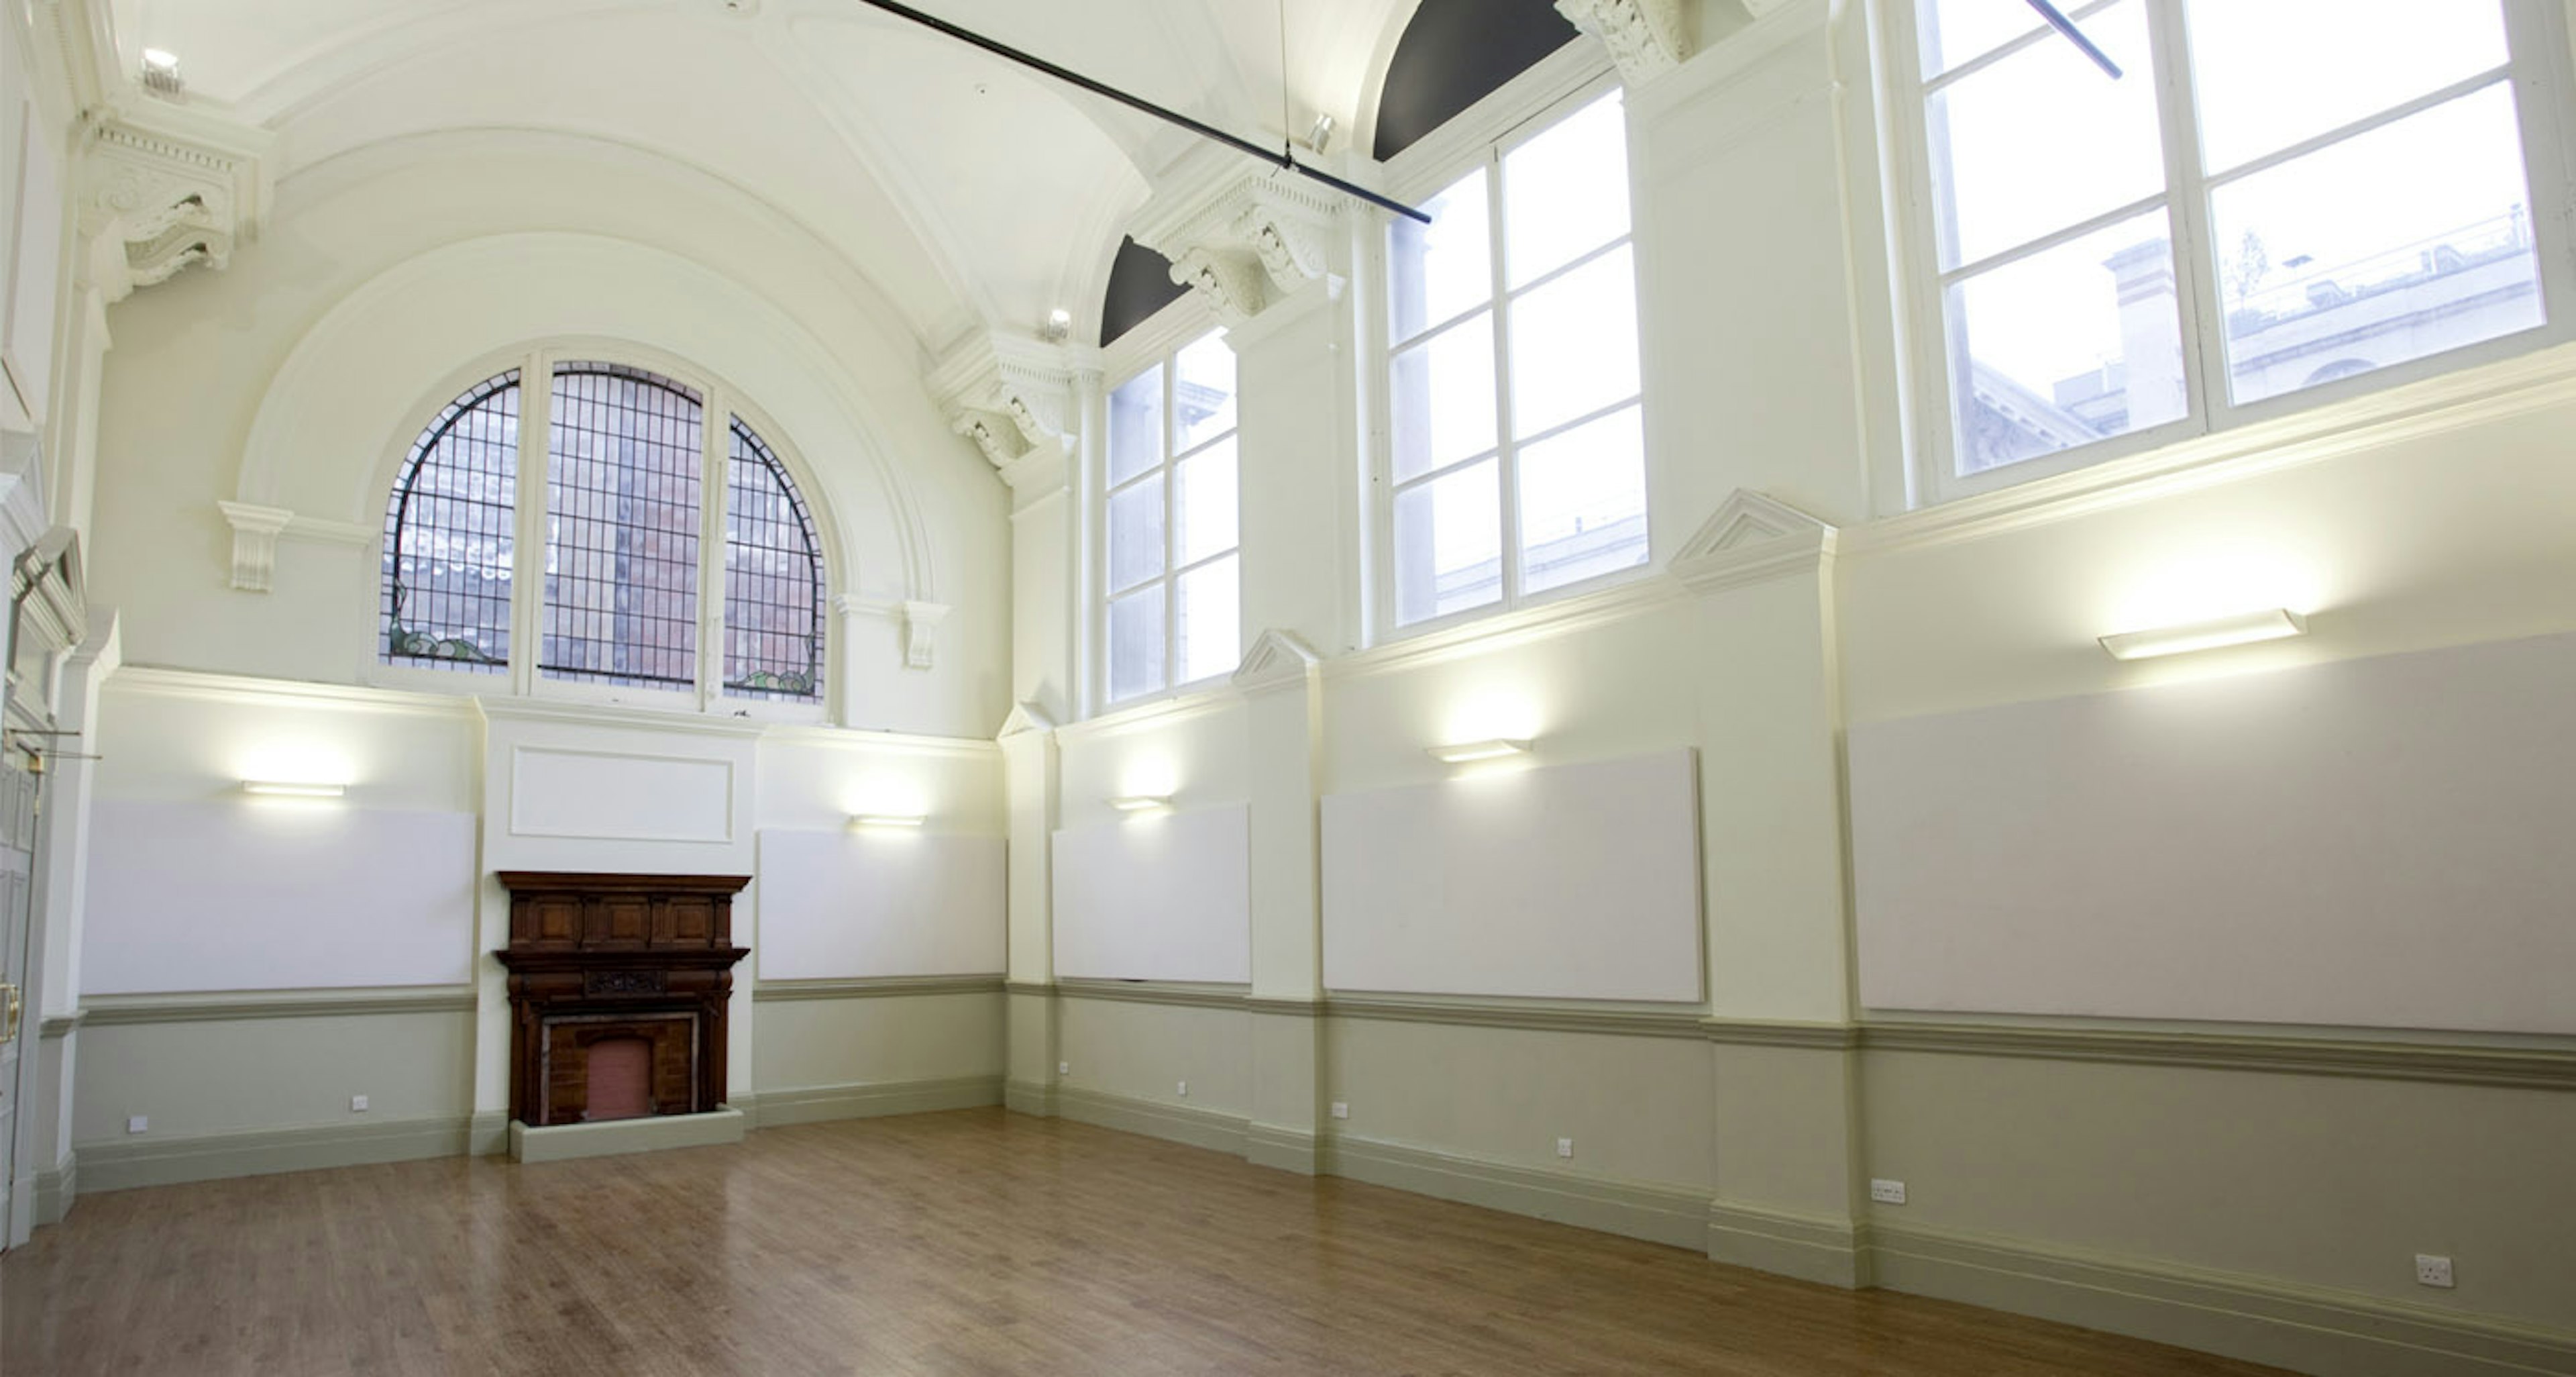 Bridal Shower Venues - Shoreditch Town Hall - Events in Large Committee Room - Banner